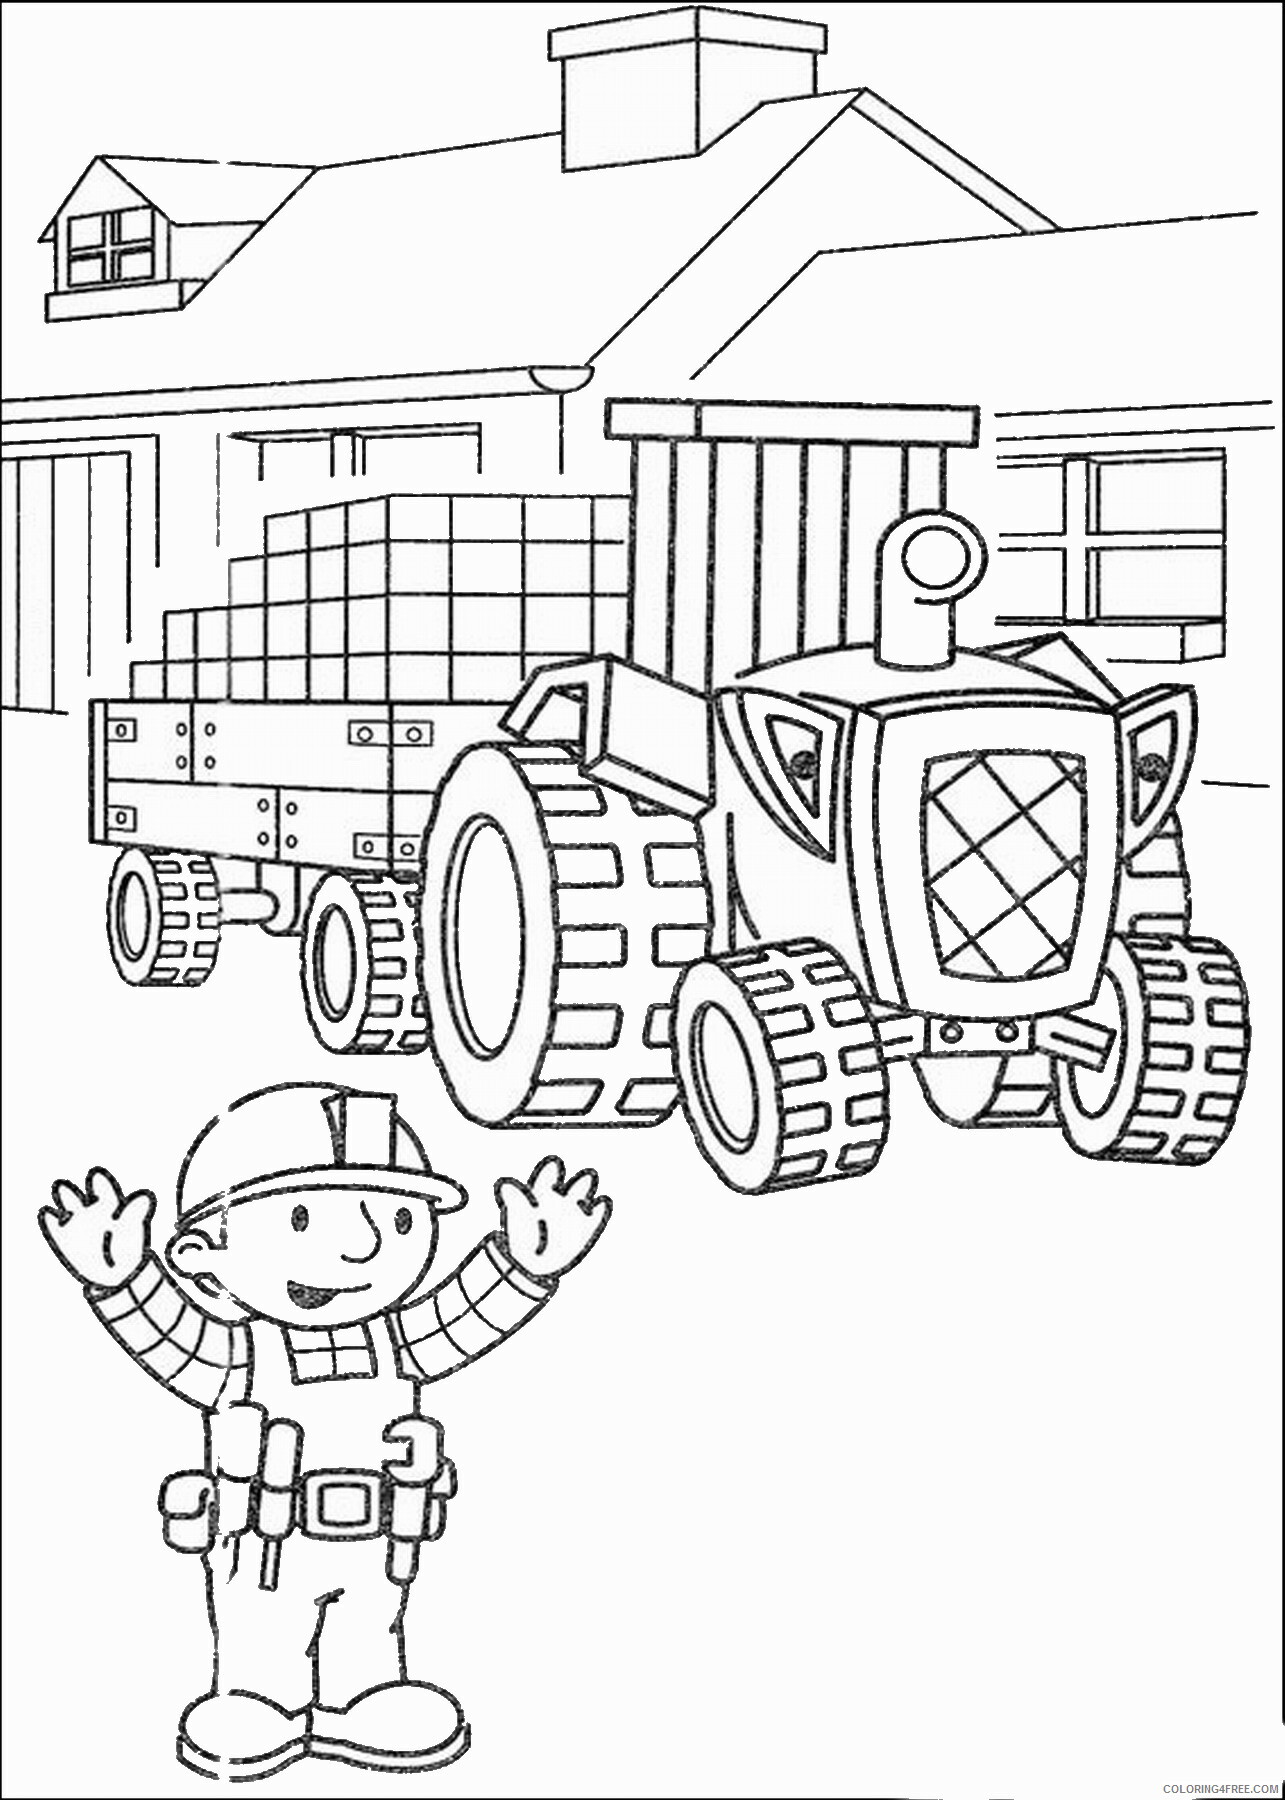 Bob the Builder Coloring Pages TV Film bob the builder_26 Printable 2020 00976 Coloring4free